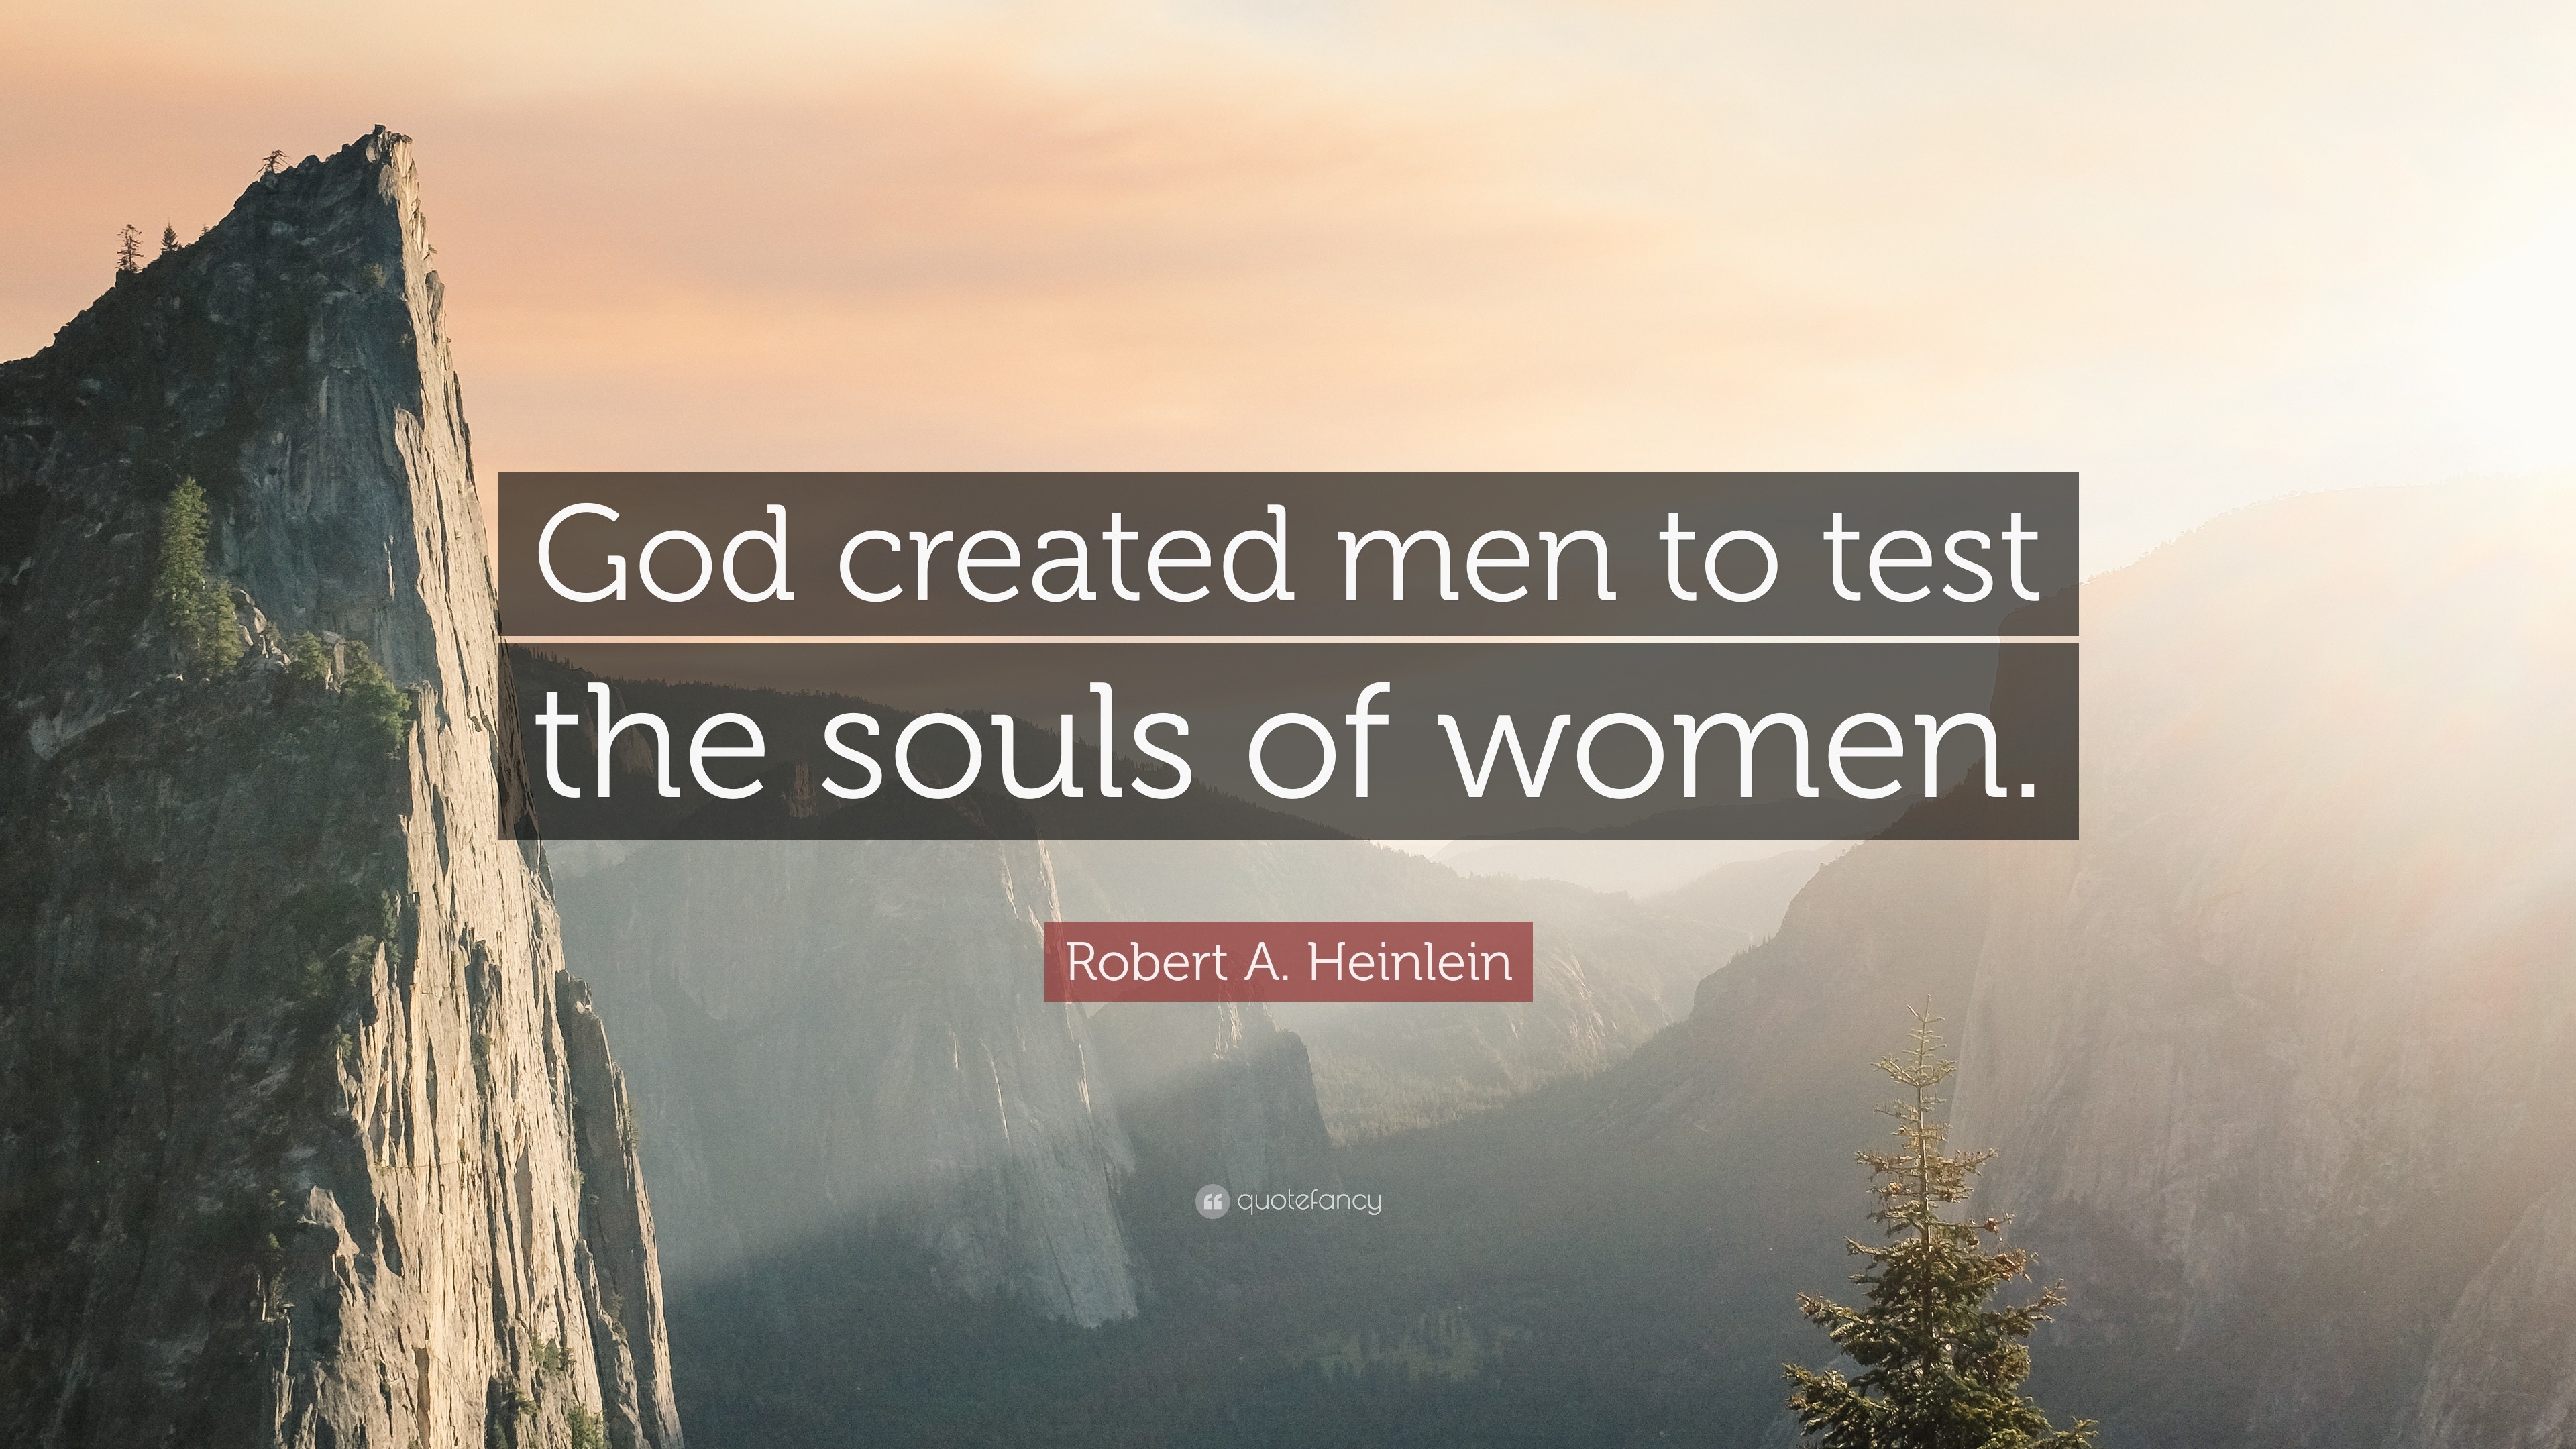 233974-Robert-A-Heinlein-Quote-God-created-men-to-test-the-souls-of-women.jpg